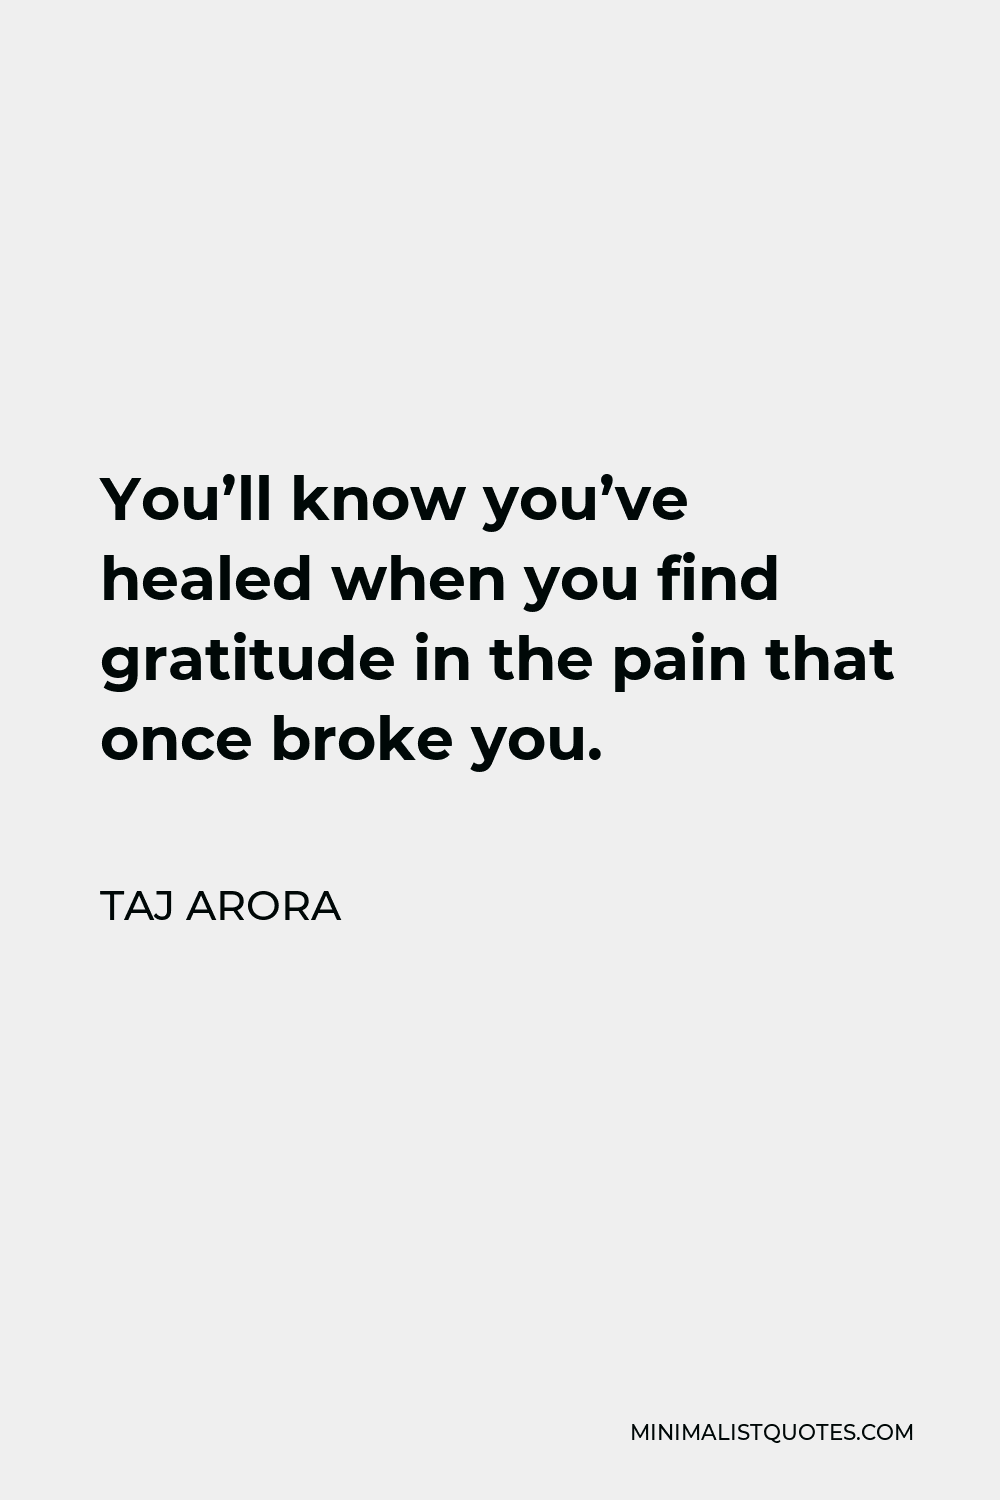 Taj Arora Quote - You’ll know you’ve healed when you find gratitude in the pain that once broke you.